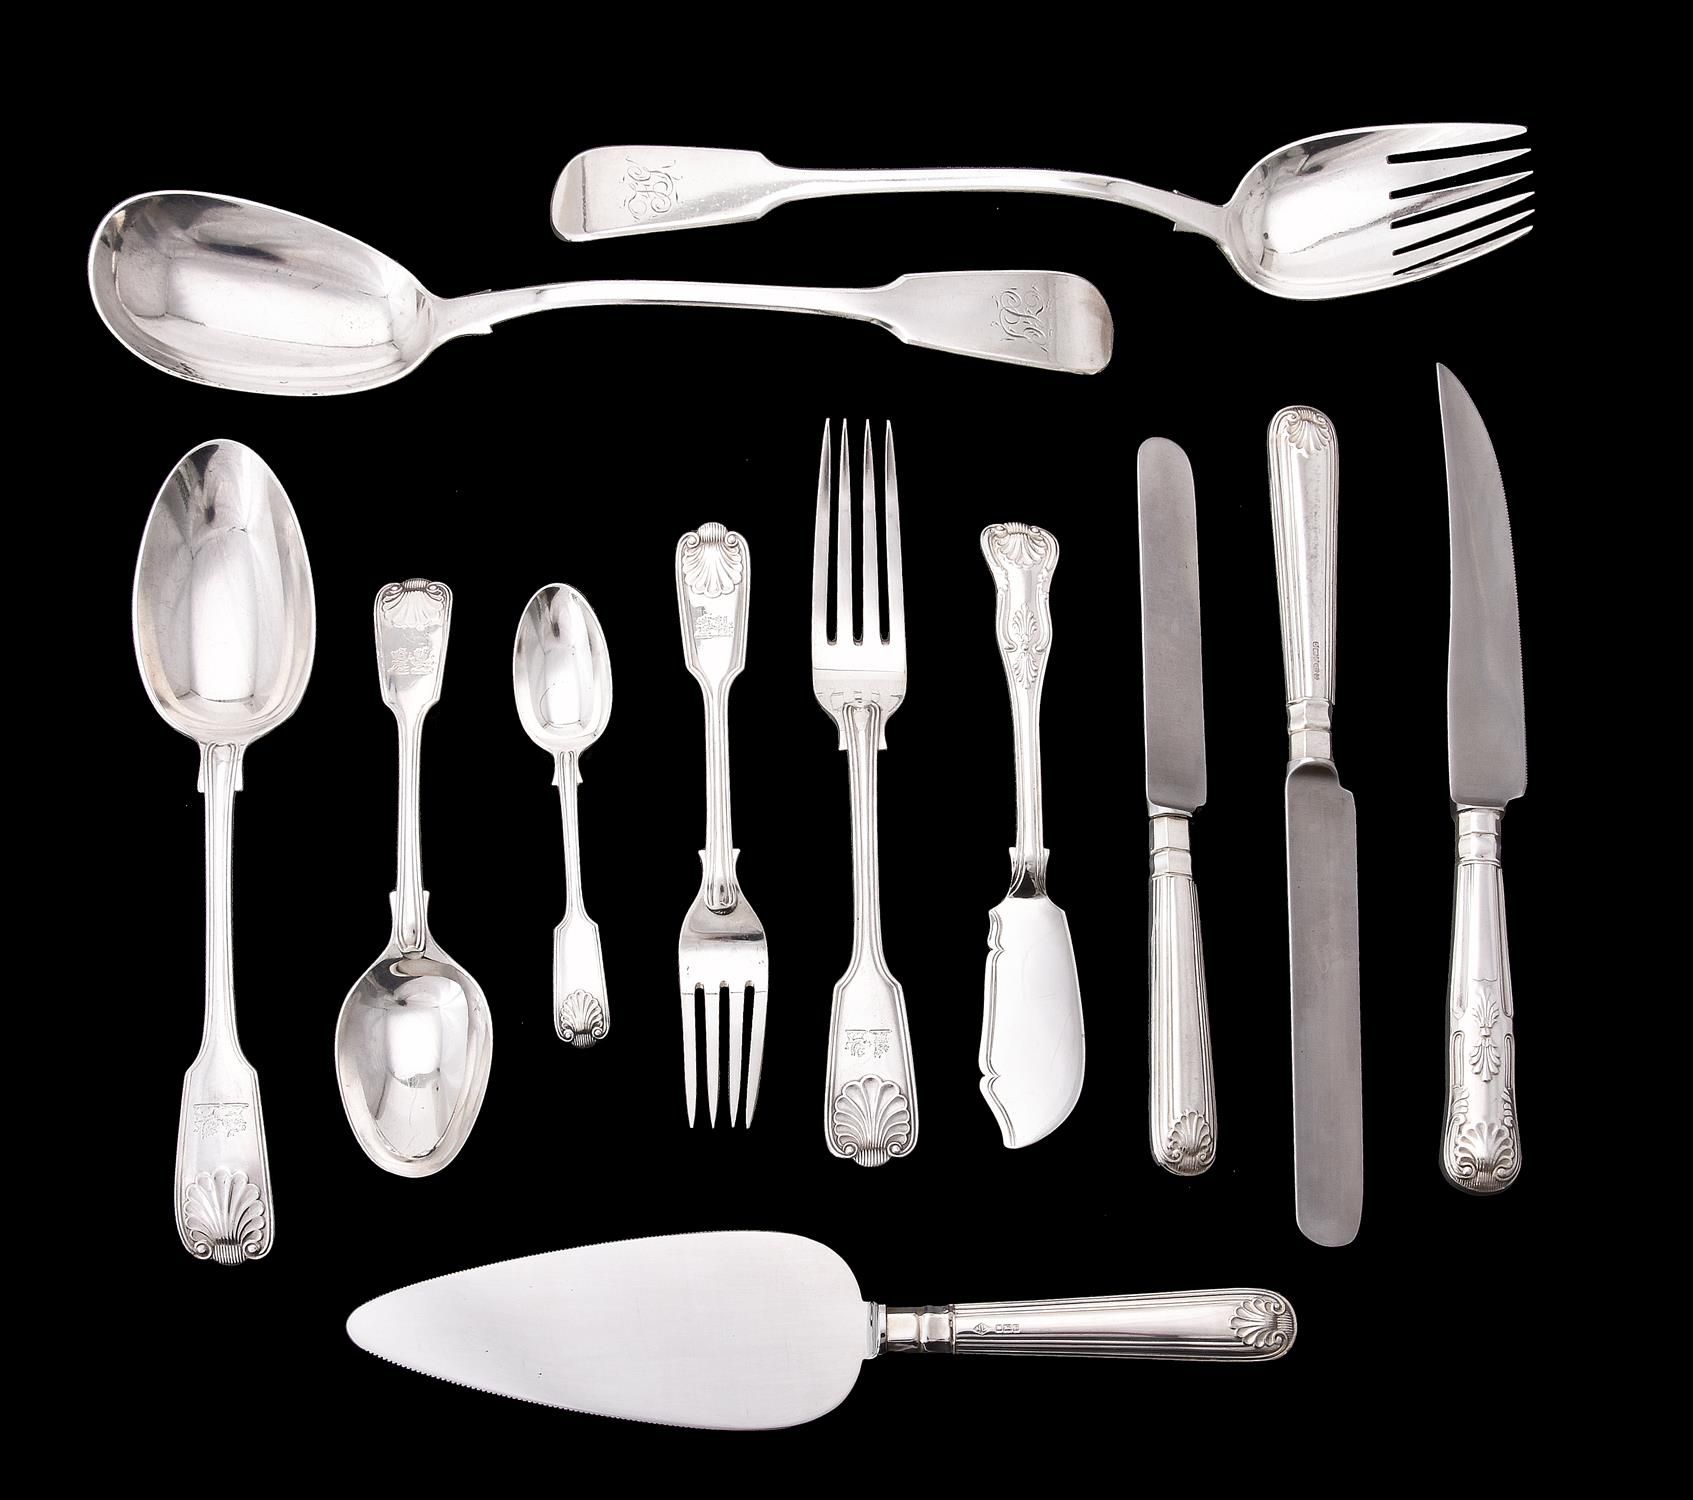 A collection of silver fiddle, shell and thread pattern flatware Colección de cu&hellip;